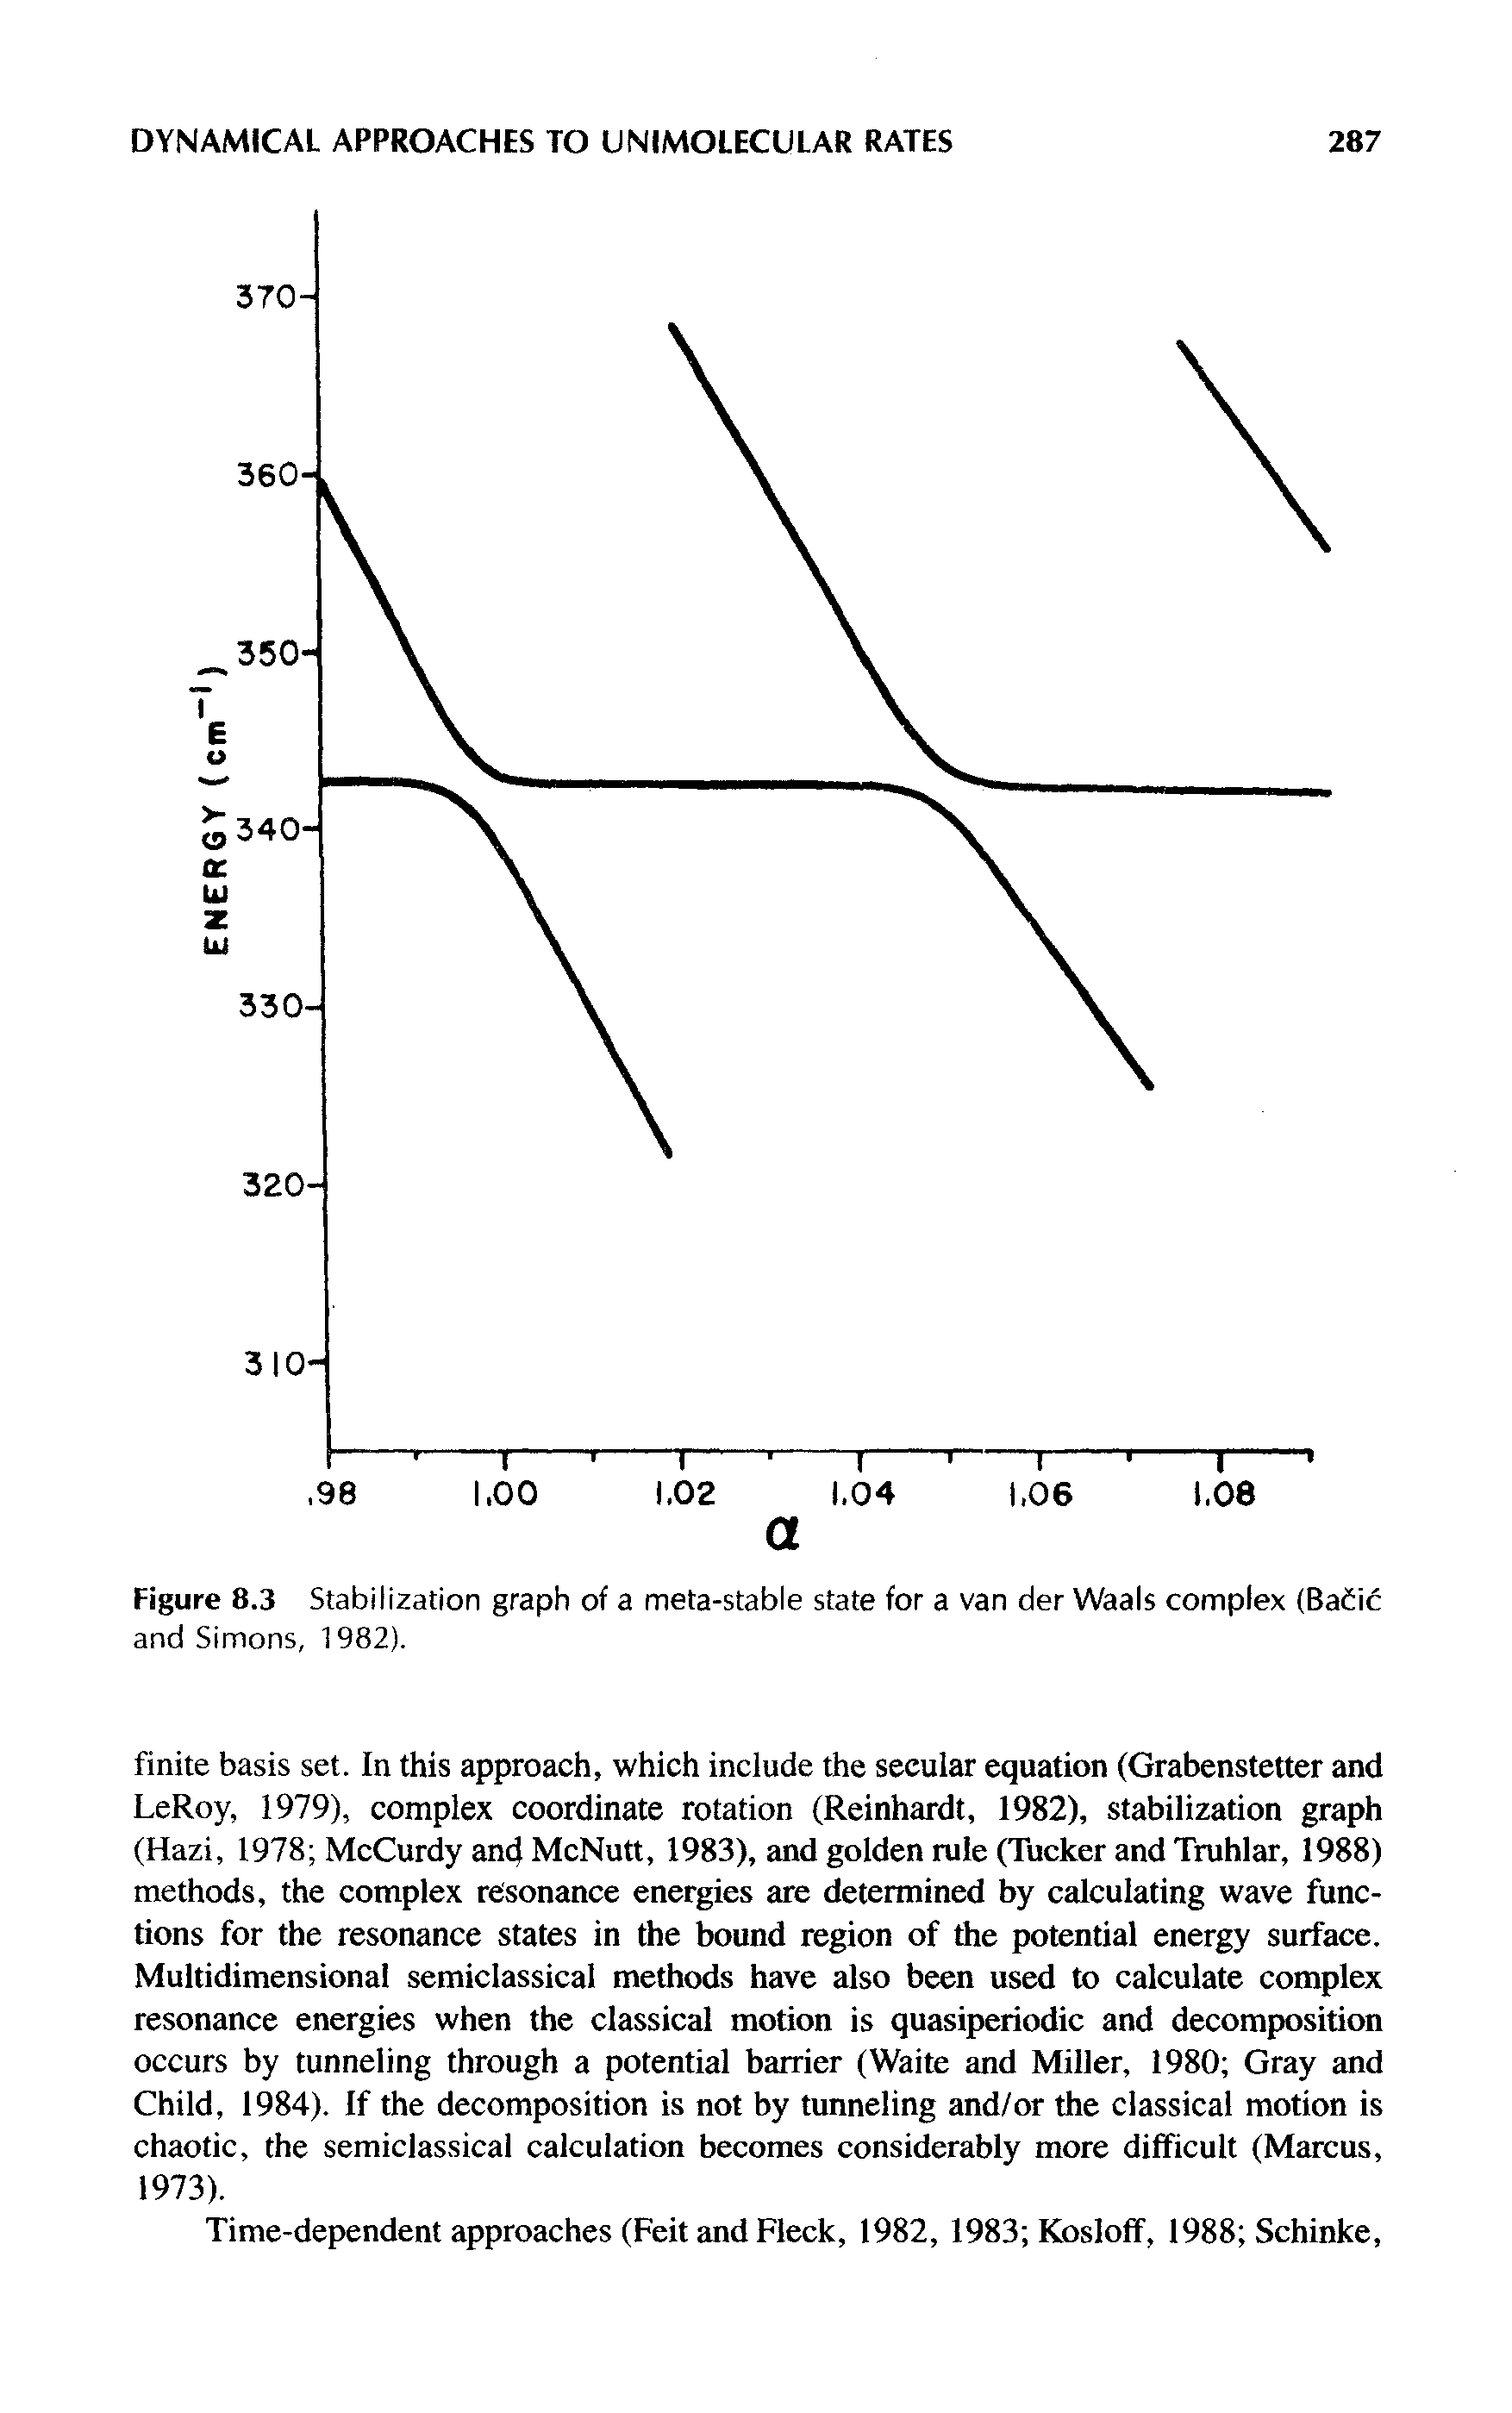 Figure 8.3 Stabilization graph of a meta-stable state for a van der Waals complex (BaCic and Simons, 1982).